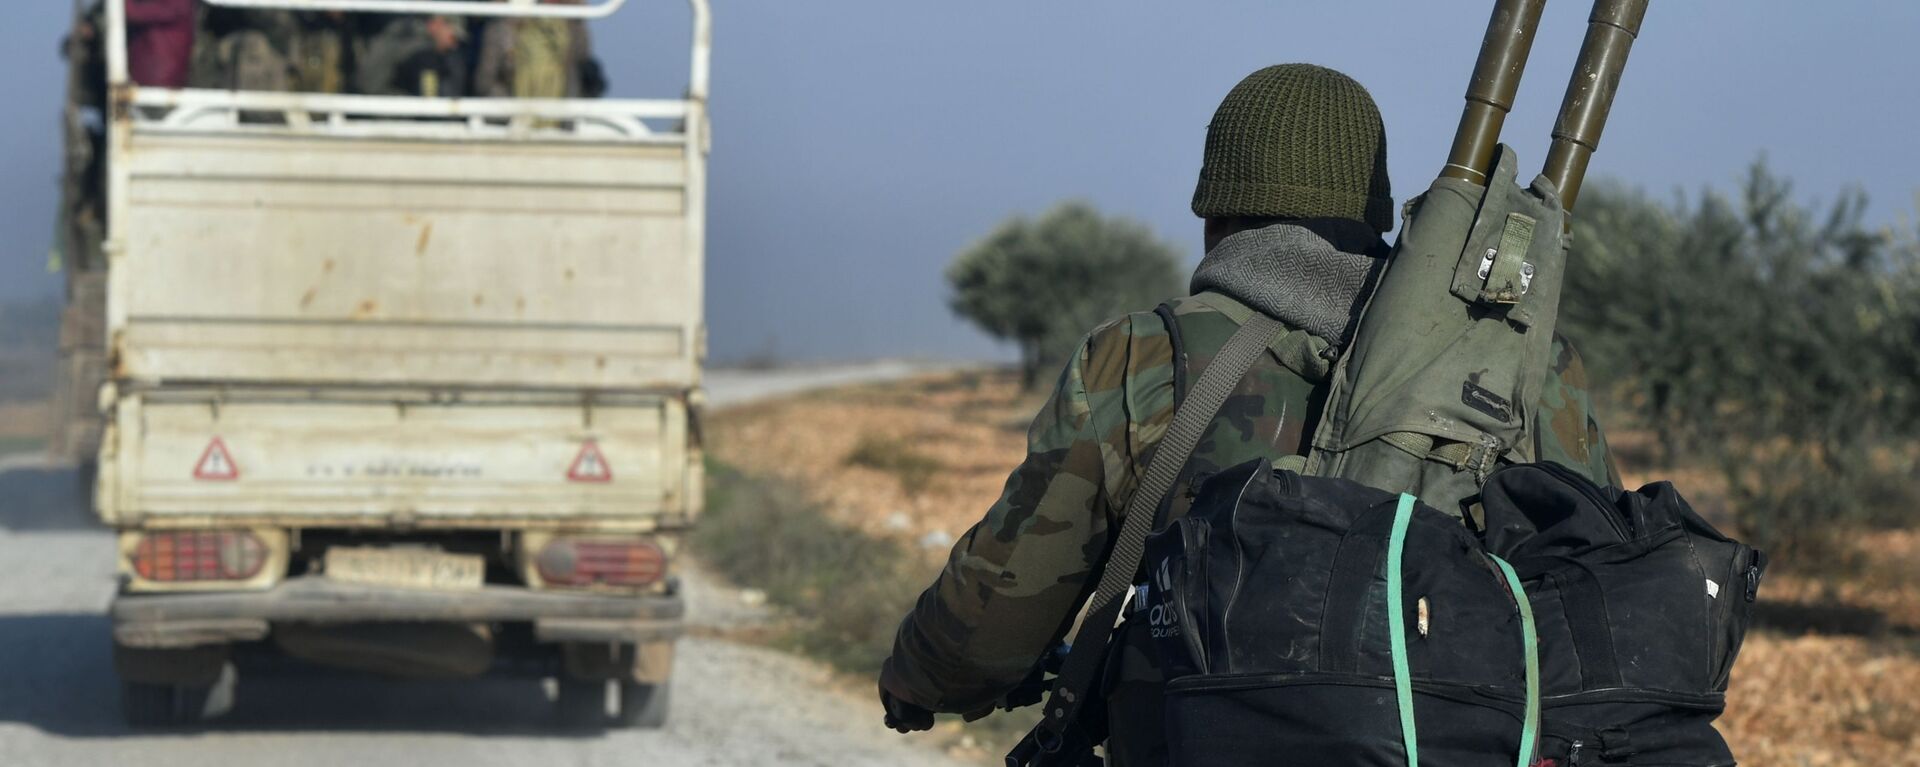 Soldiers of Syrian army are seen after the liberation of Jaranjaz town from militants, northwestern province of Idlib, Syria. Due to the location of Jarjanaz, this will enable the army to take control over the important Hama-Aleppo road in Idlib, which remains a terrorist stronghold. - Sputnik International, 1920, 07.09.2021